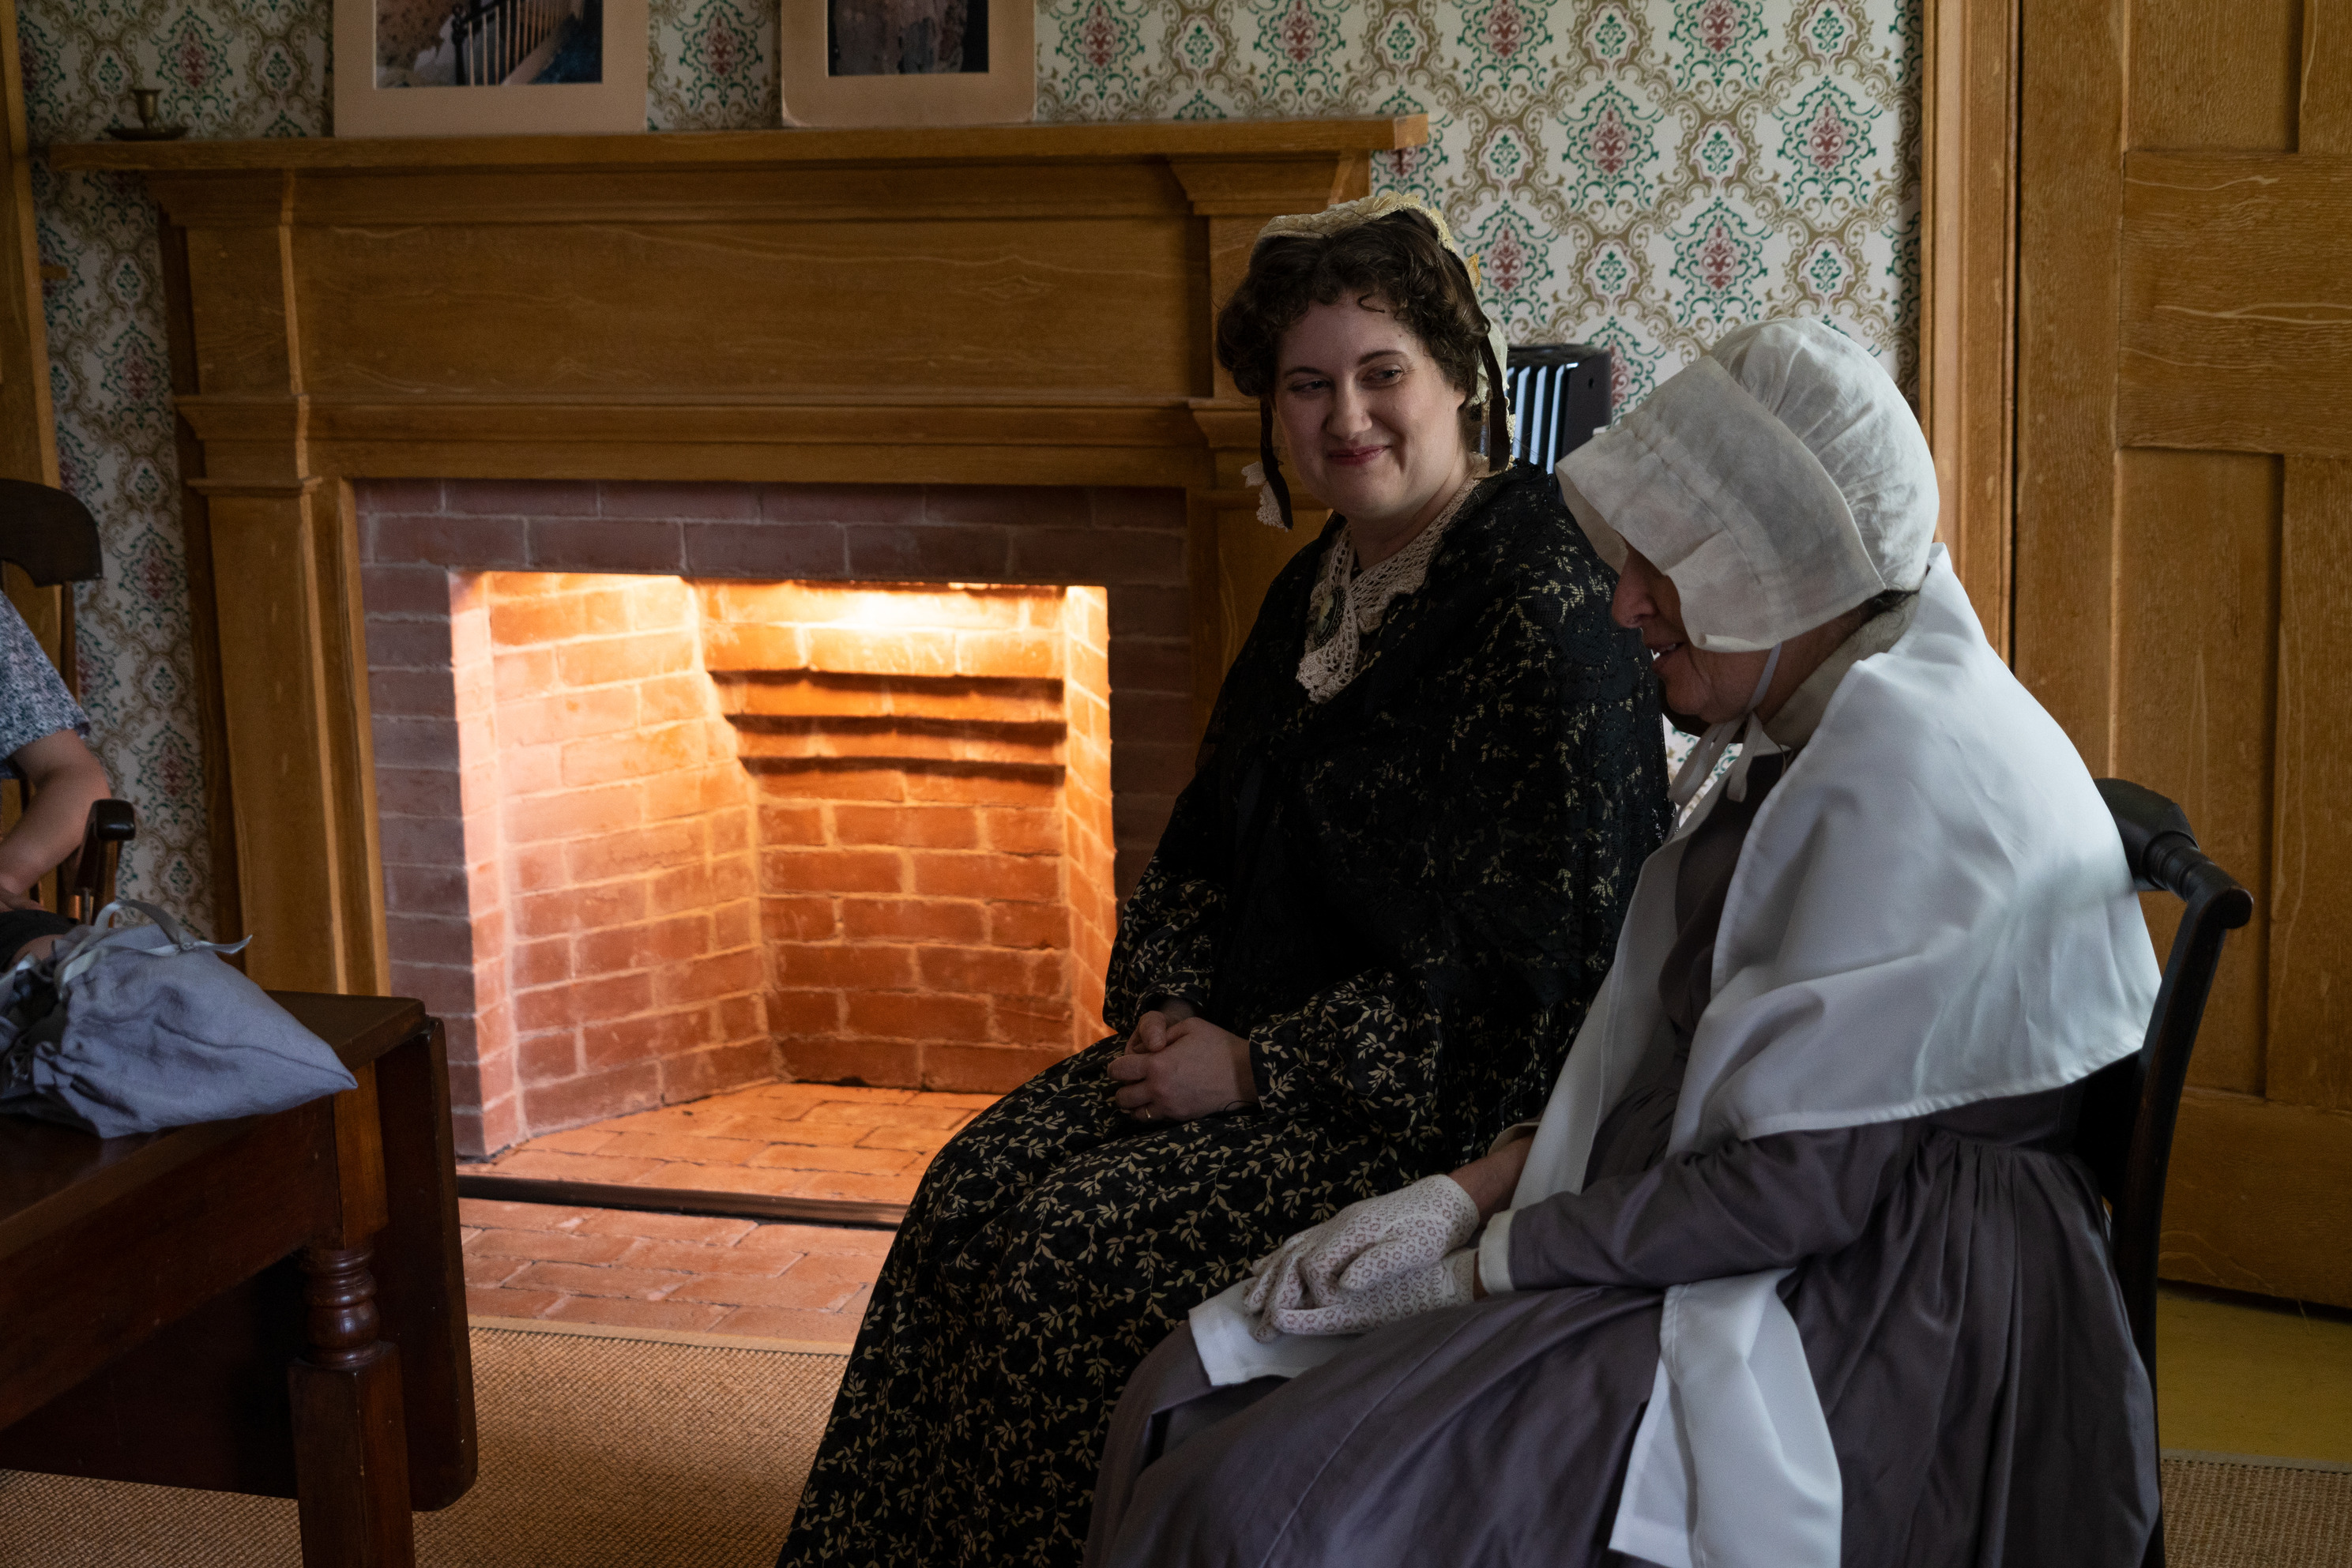 Visitors listen to a living history program in a historical home.